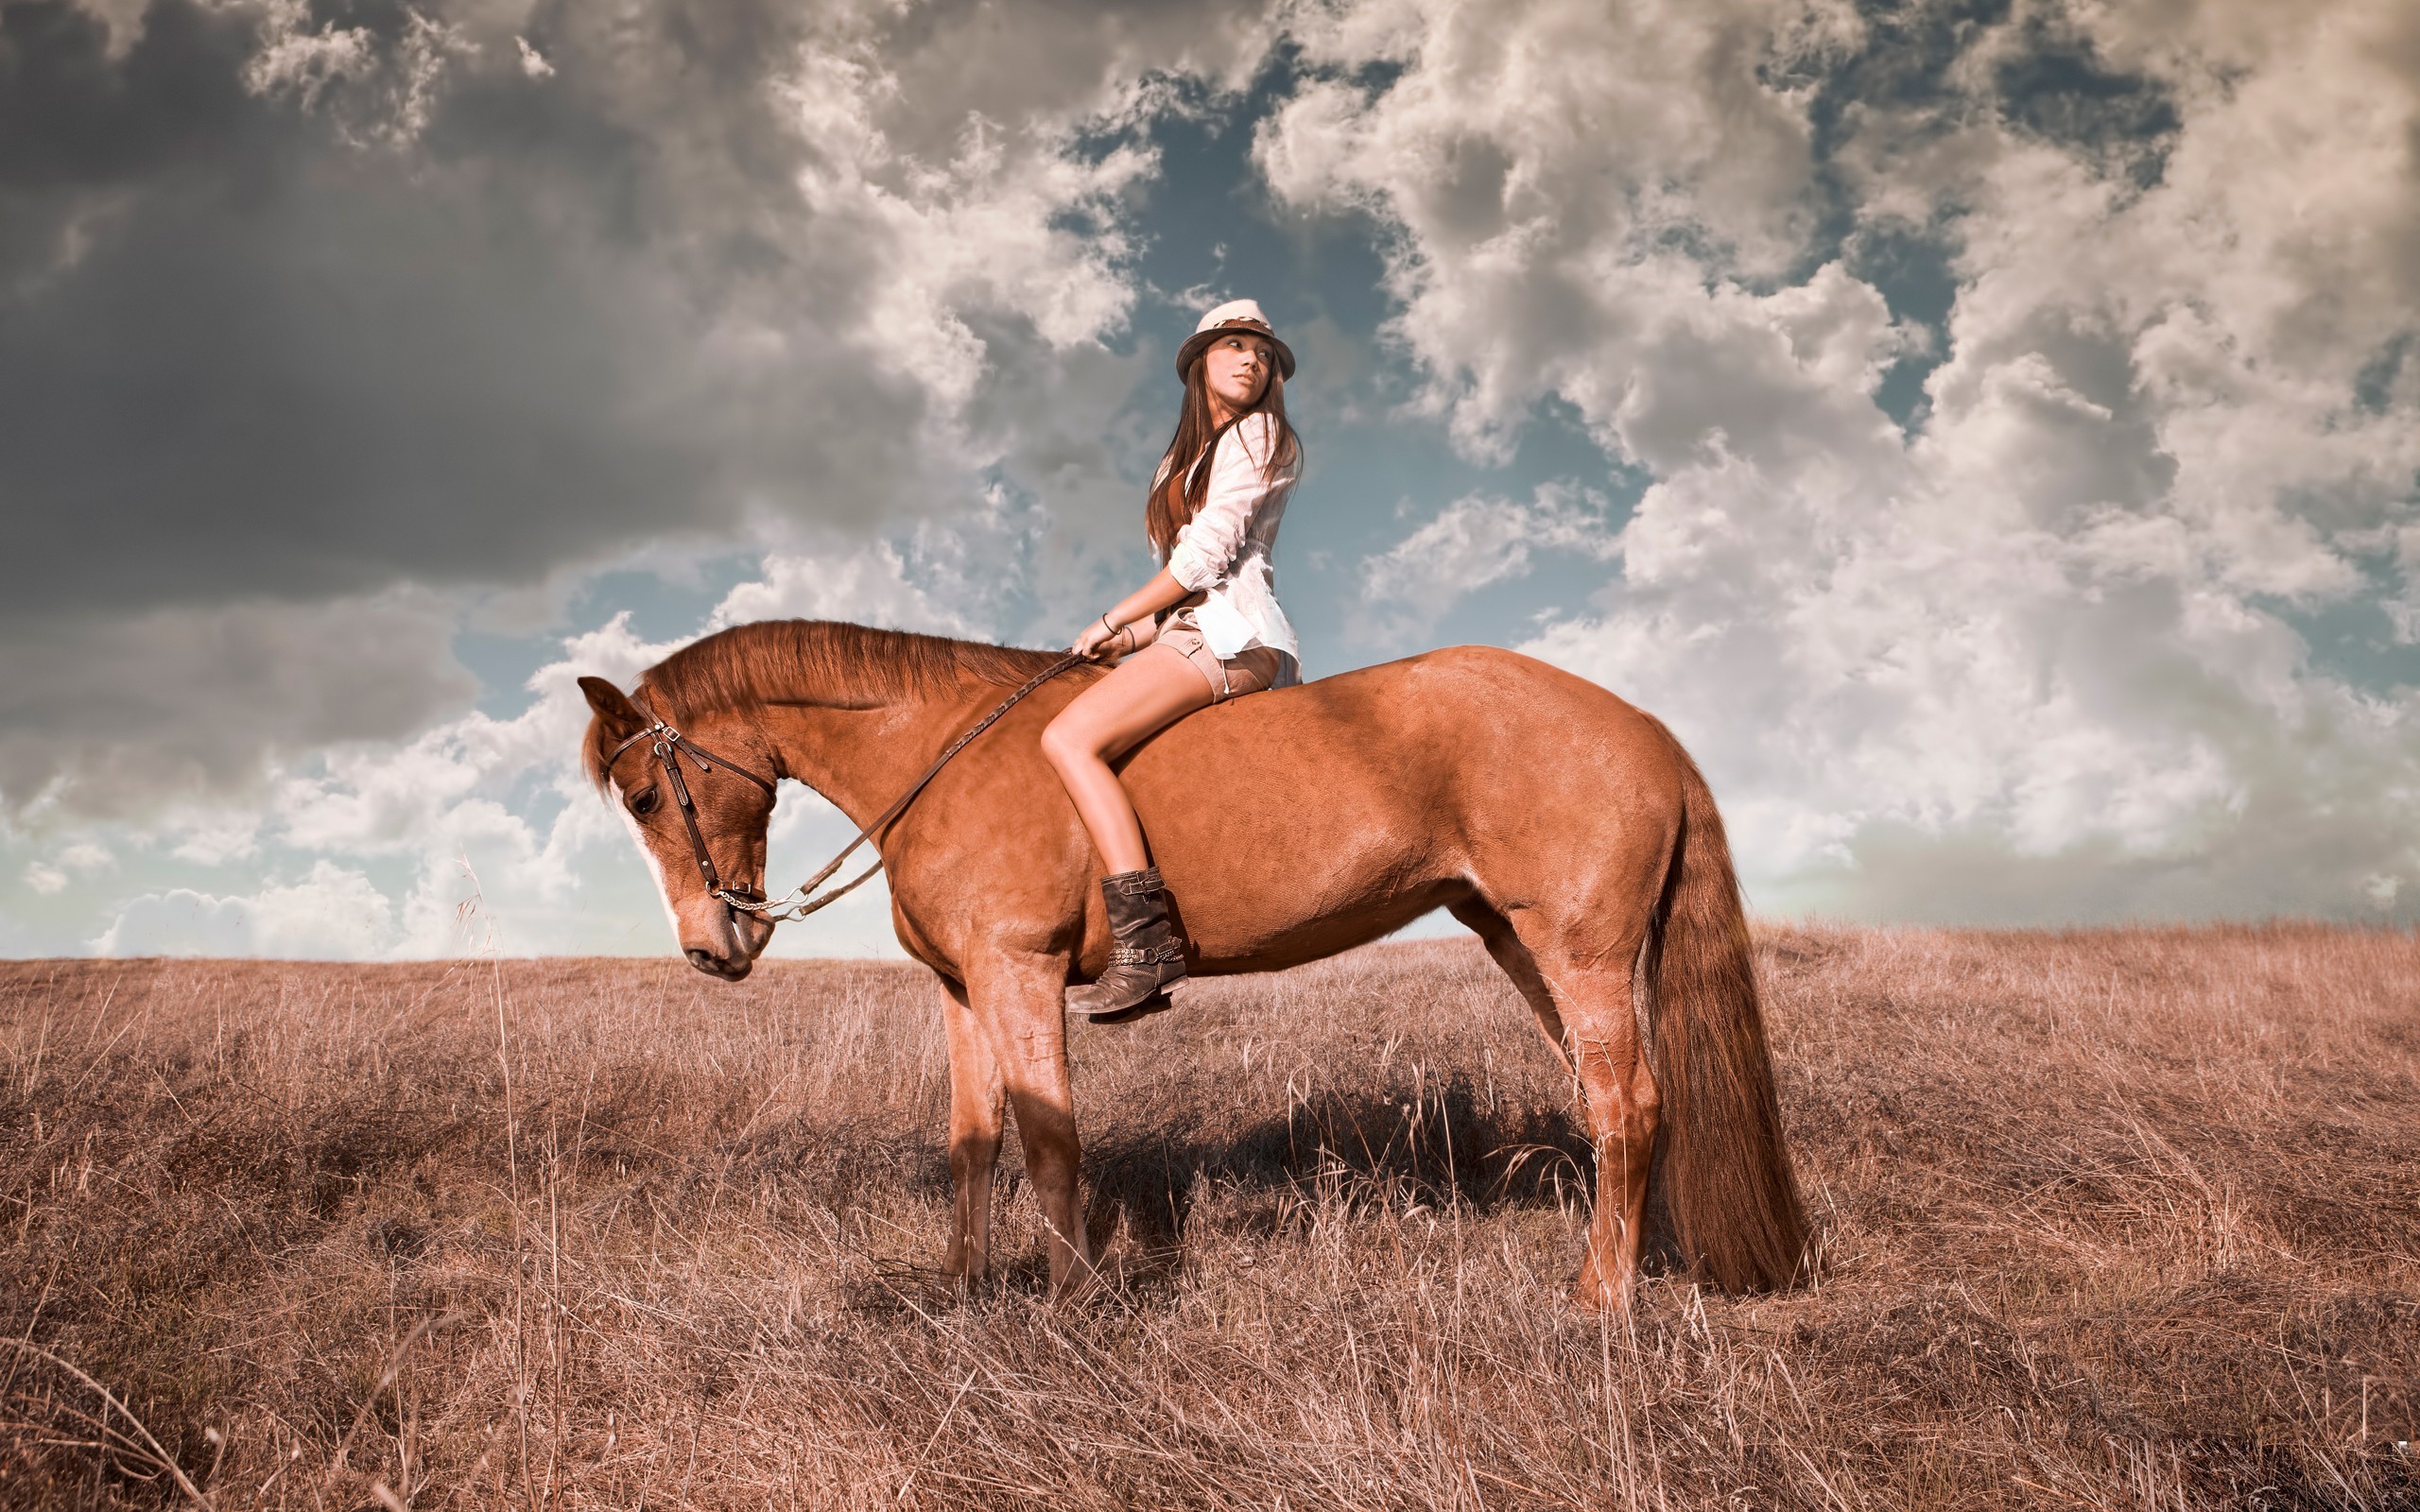 Girls Girl in hat riding a horse 105131 Bareback horsewoman Pinterest Horse, Horse wallpaper and other